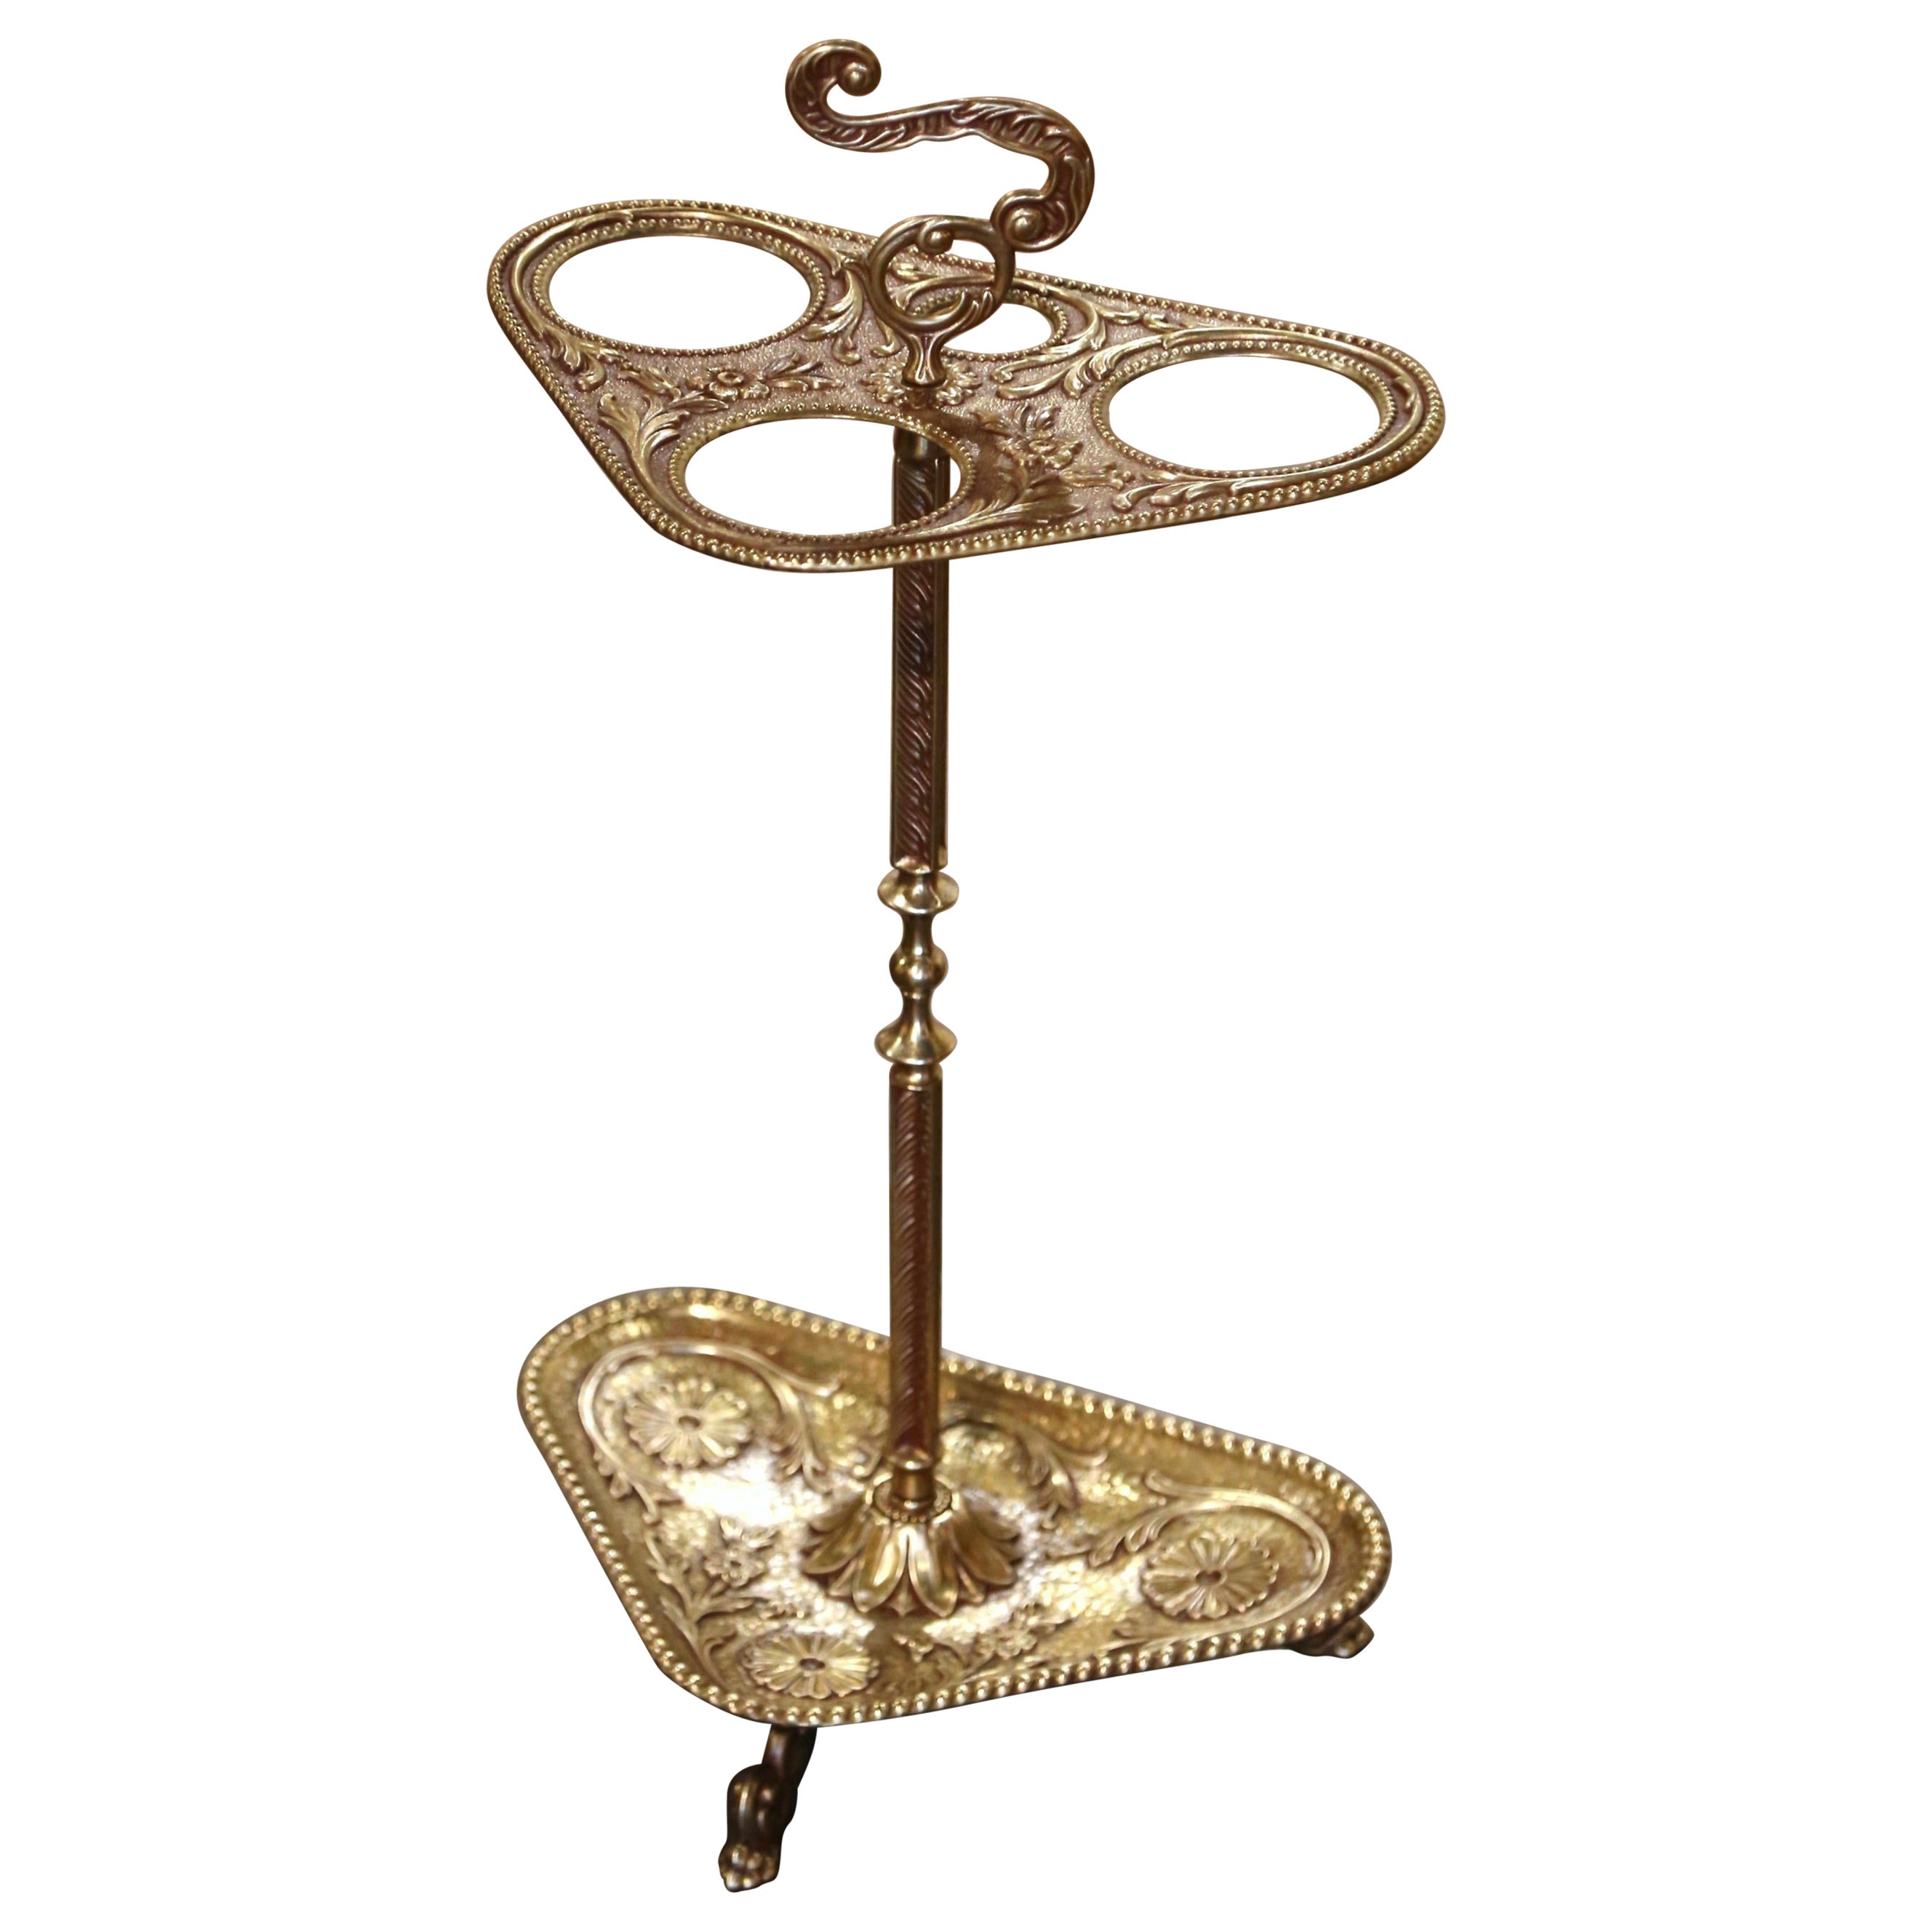 Early 20th Century French Brass Umbrella Stand with Repousse Motifs